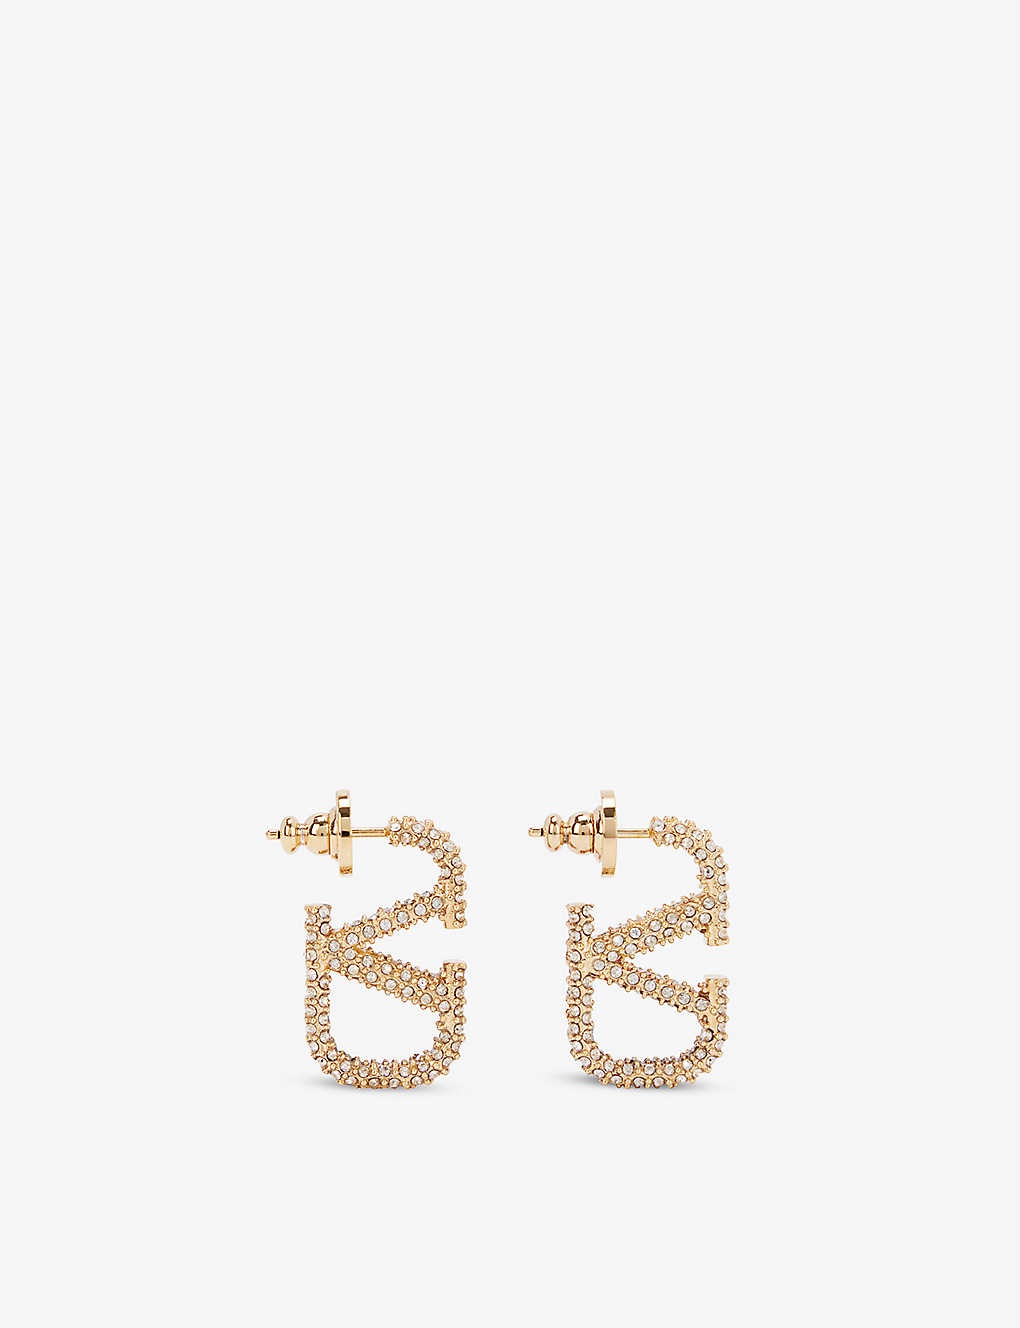 VLOGO gold-toned brass and rhinestones earrings - 2